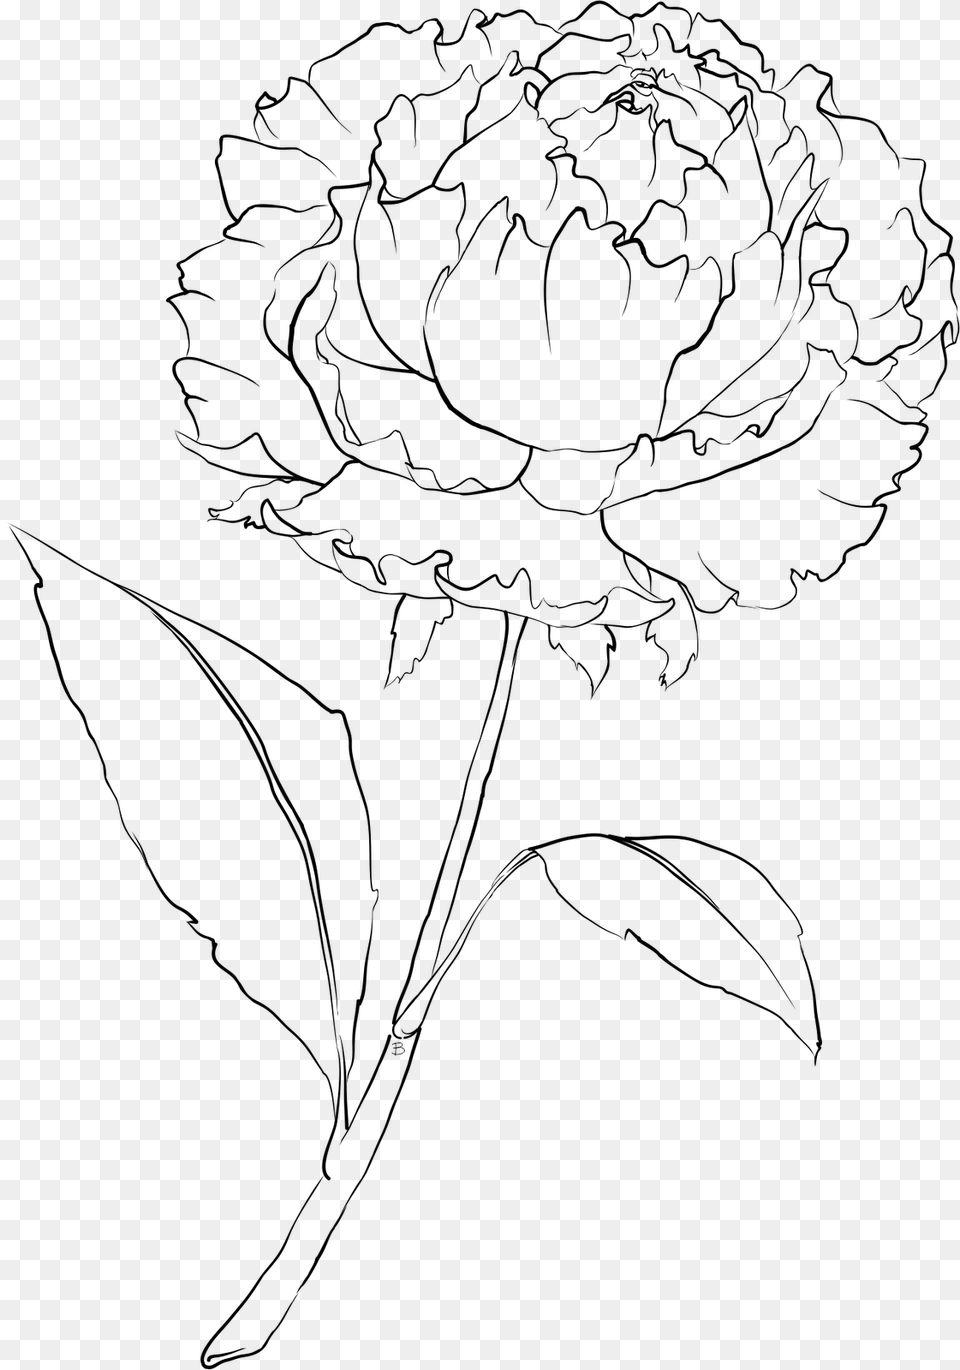 Drawn Peony Flower Simple Peony Flower Drawing, Gray Free Png